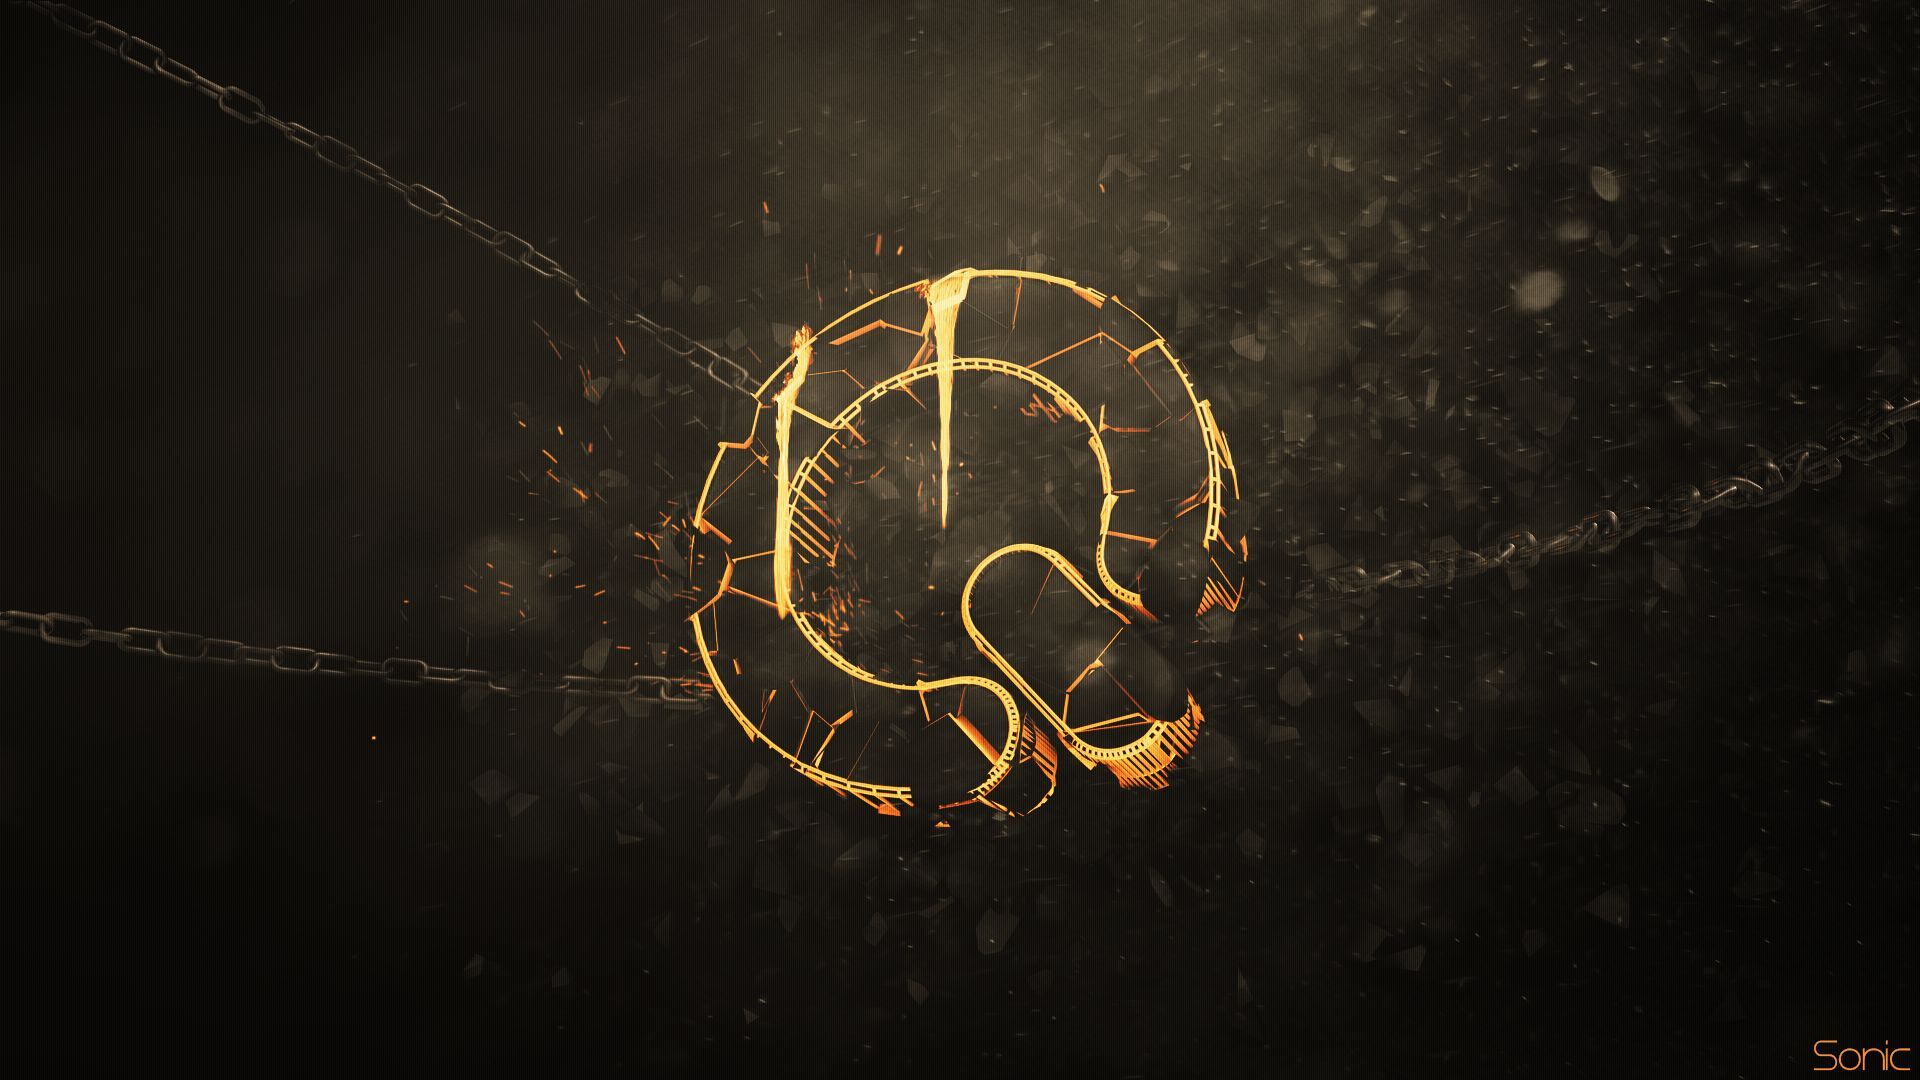 Q Dance Wallpaper Made With Cinema4D And Photohop. HQ Available